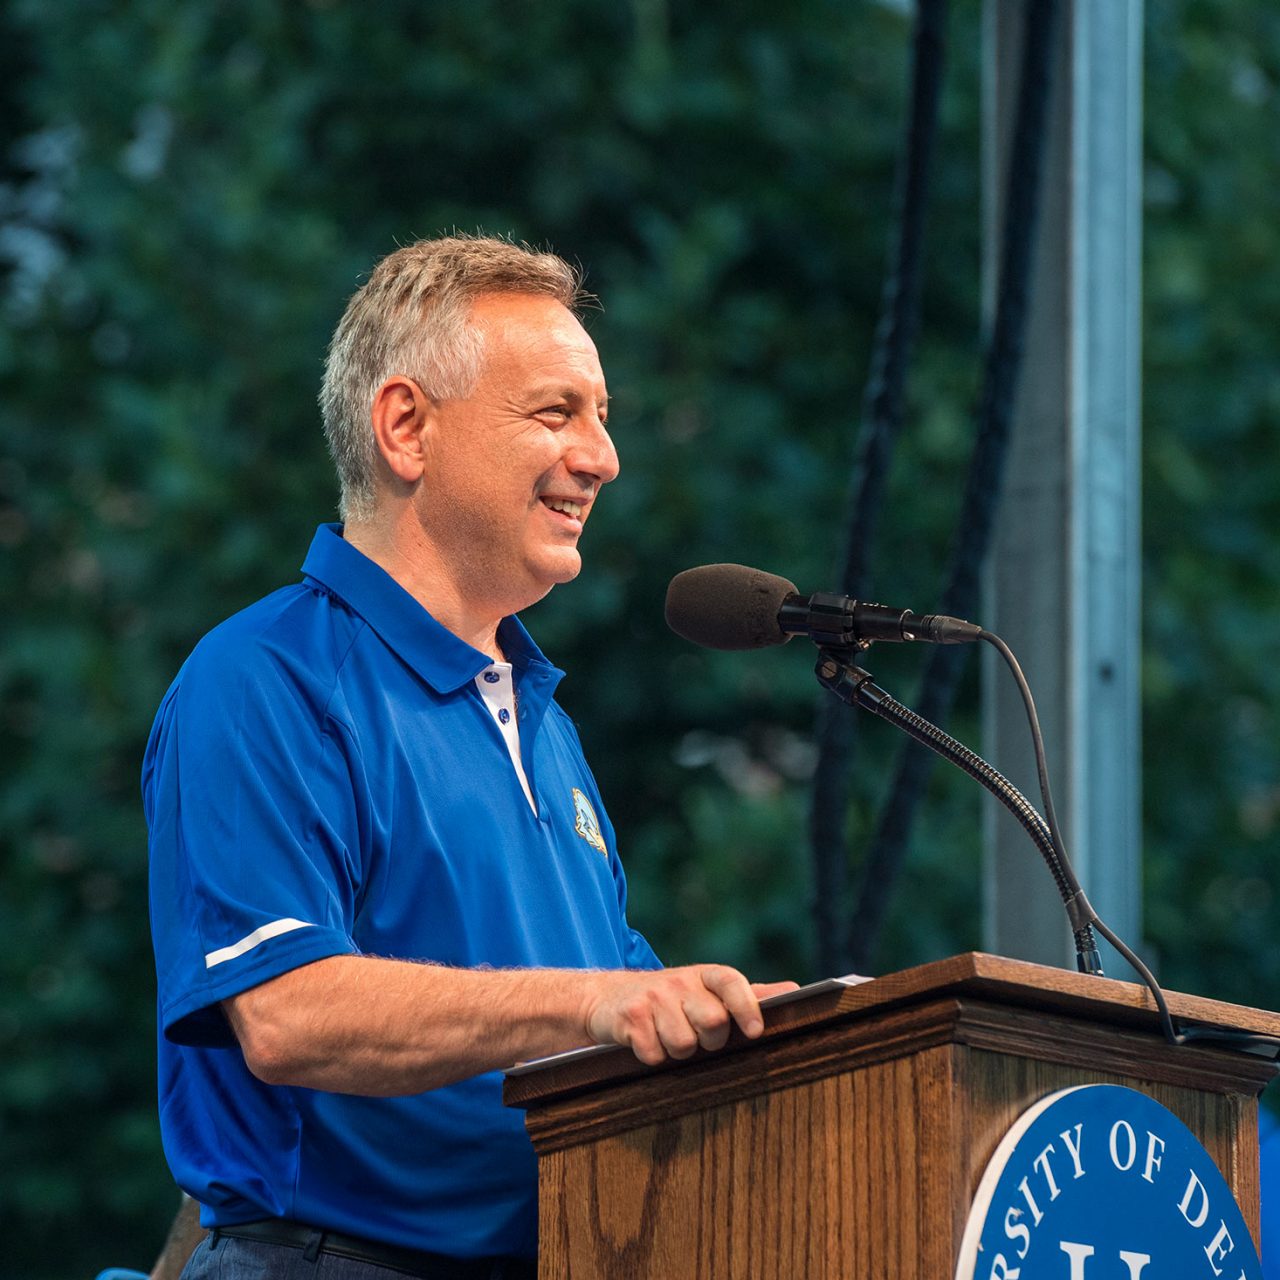 1743 Welcome Days holds Twilight Ceremony, August 27th, 2018 with speakers President Dennis Assanis, Provost Robin Morgan, student speaker Qourtney Ringgold, José Rivera, SGA president Kevin Peterson and UDAA President Steve Beattie. (PHOTO RELEASE SIGNAGE WAS POSTED AT EVERY TABLE STATION.)